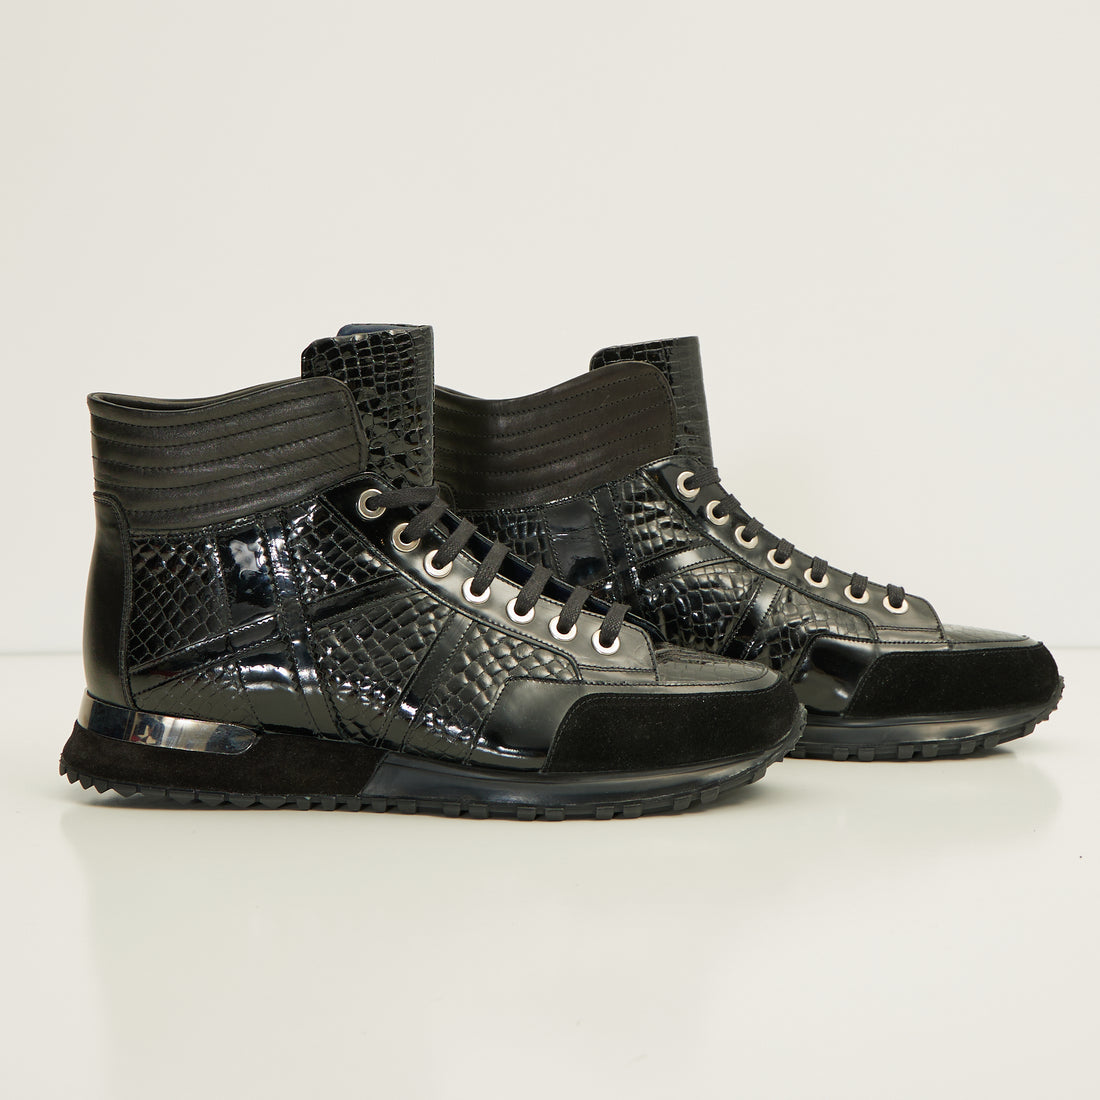 N° 30652 THE CROC HI-TOP LEATHER SNEAKER BOOTS - BLACK PATENT